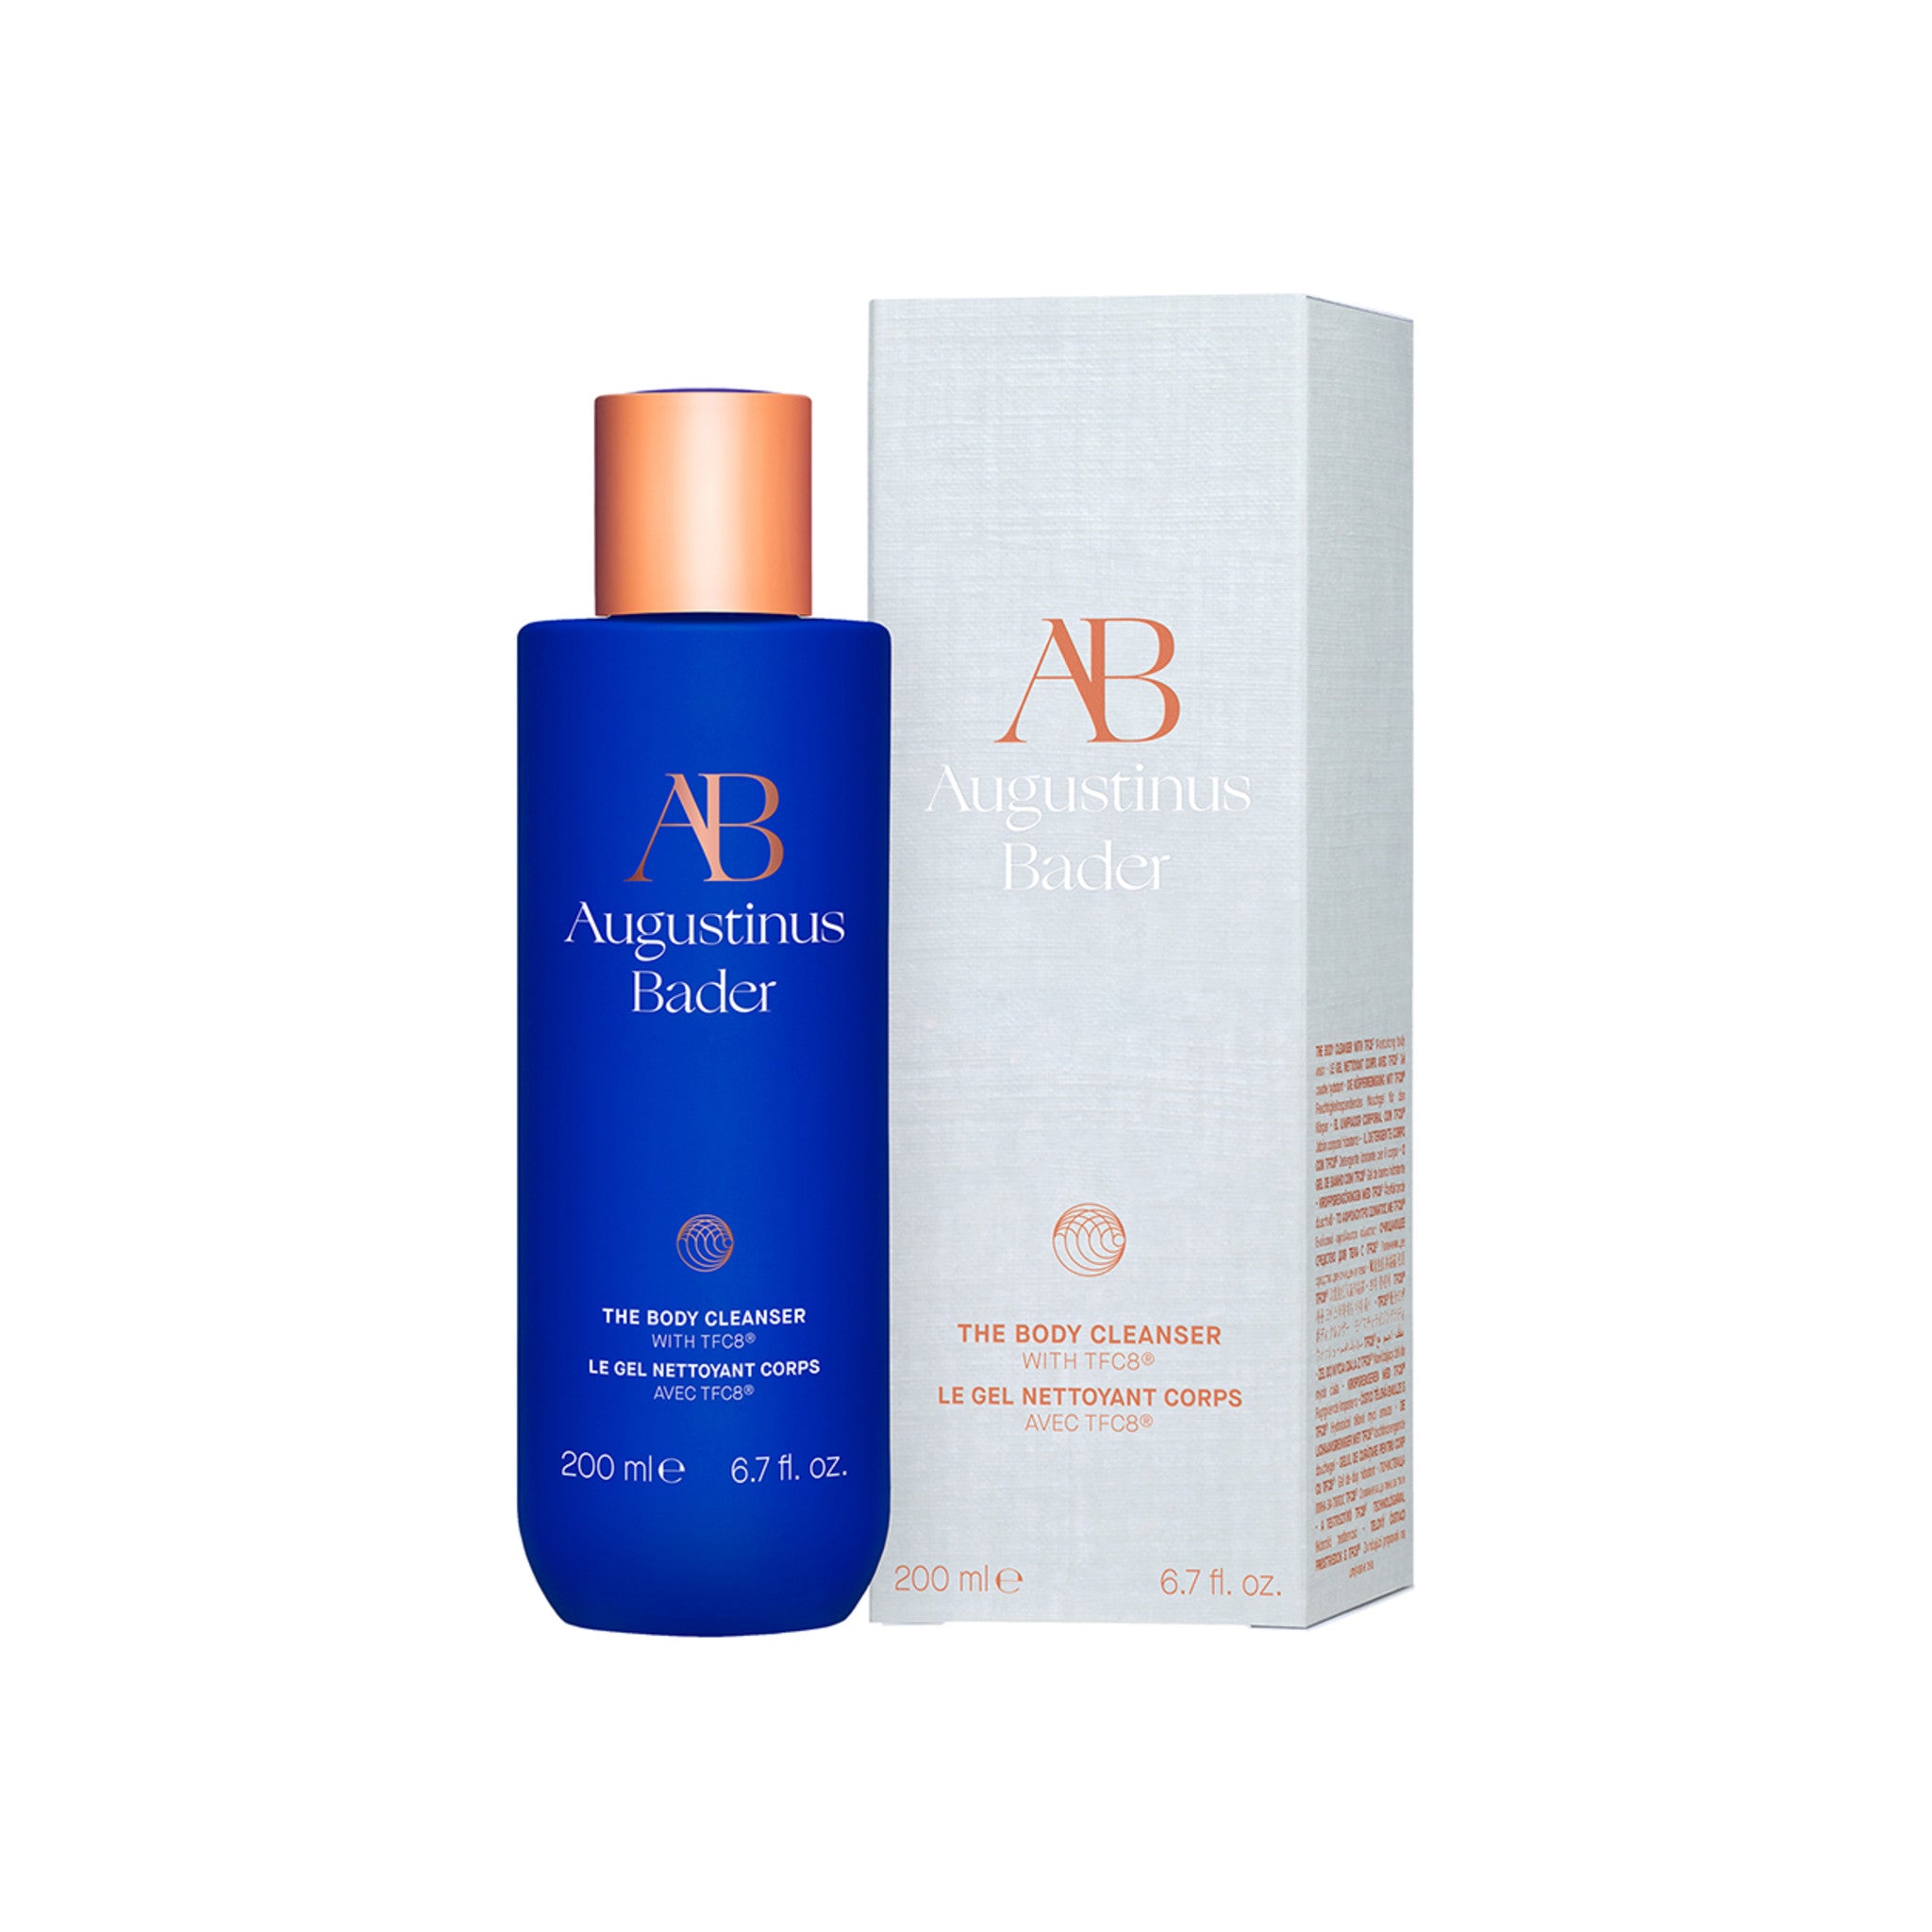 Augustinus Bader The Body Cleanser main image.